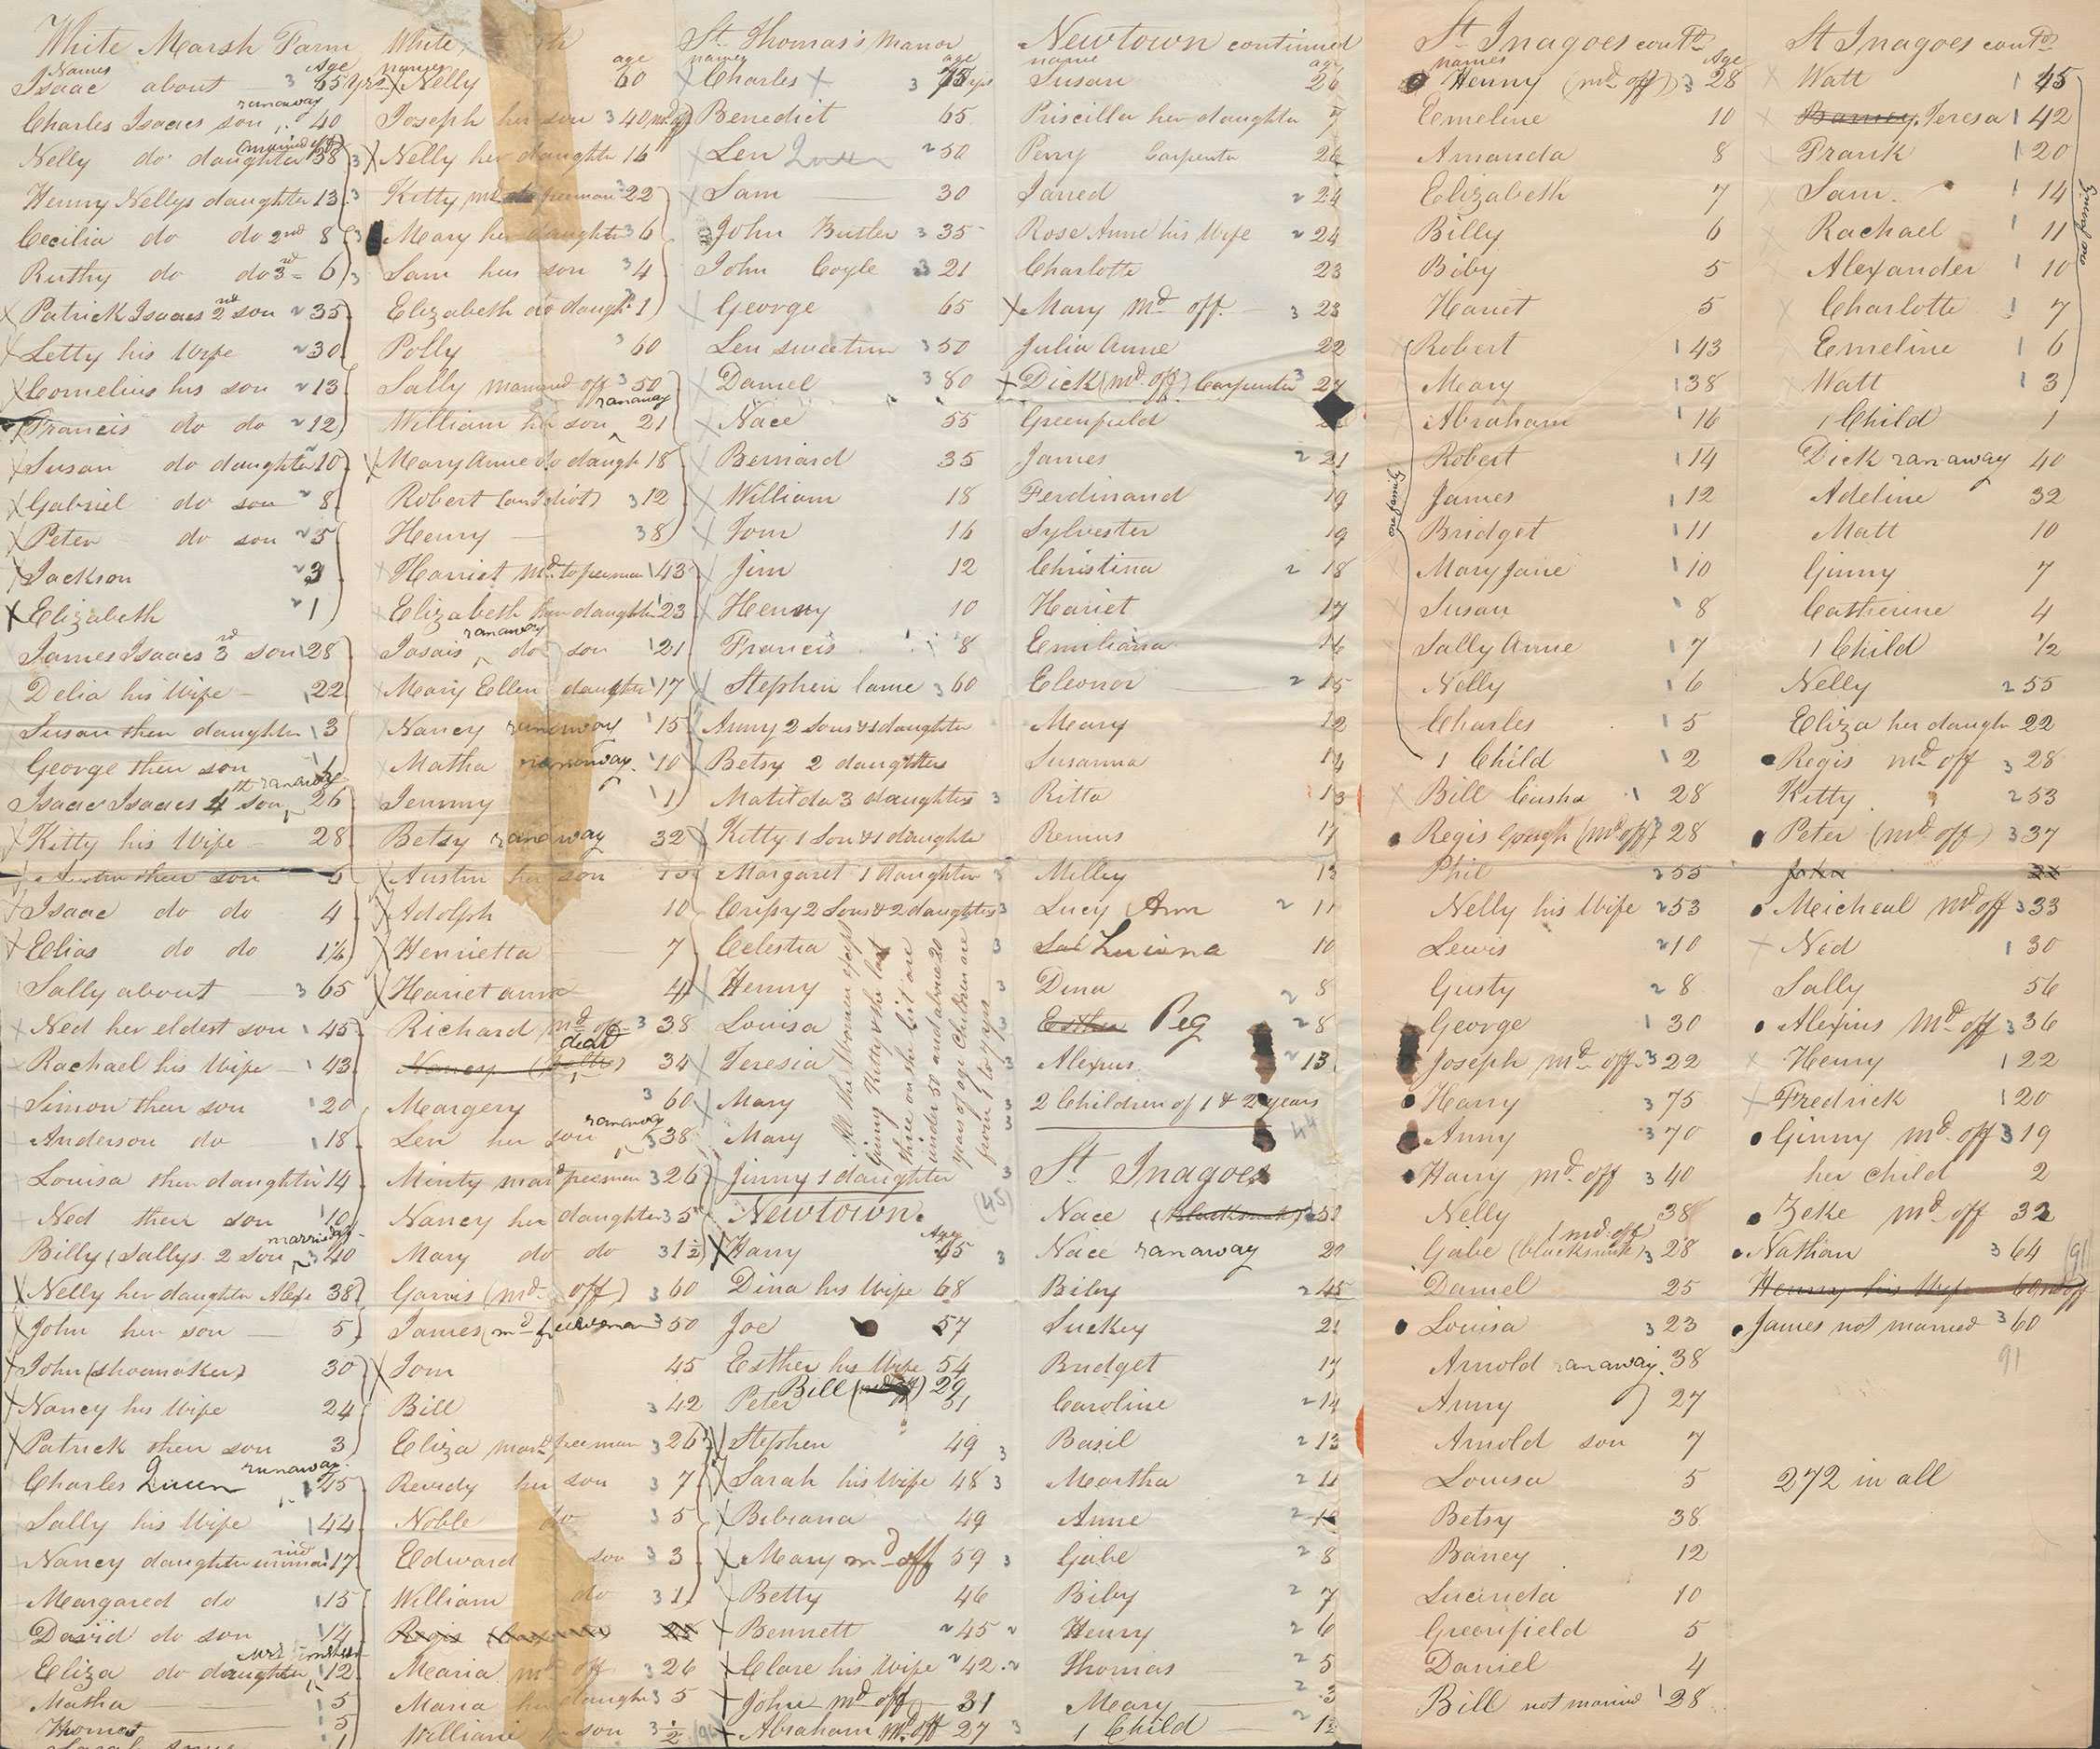 The 1838 slave census is a worn, yellowed paper that is filled with the names and ages.